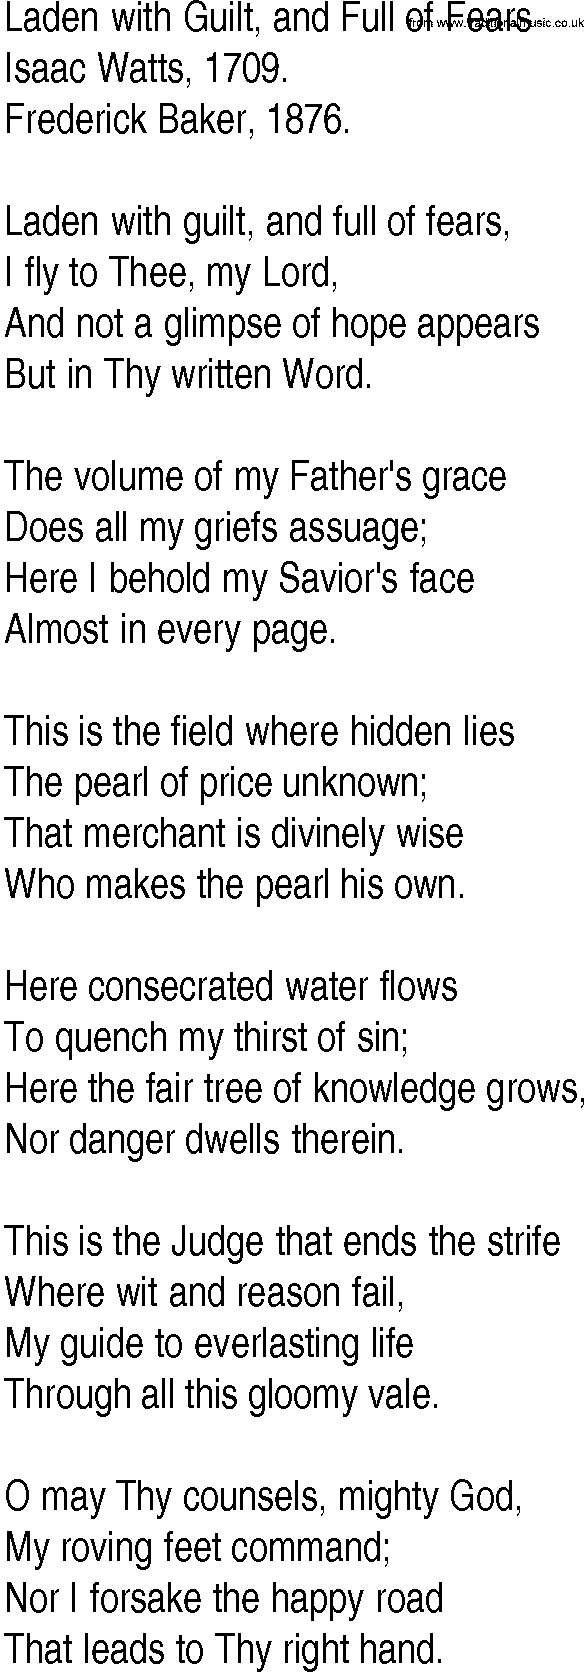 Hymn and Gospel Song: Laden with Guilt, and Full of Fears by Isaac Watts lyrics